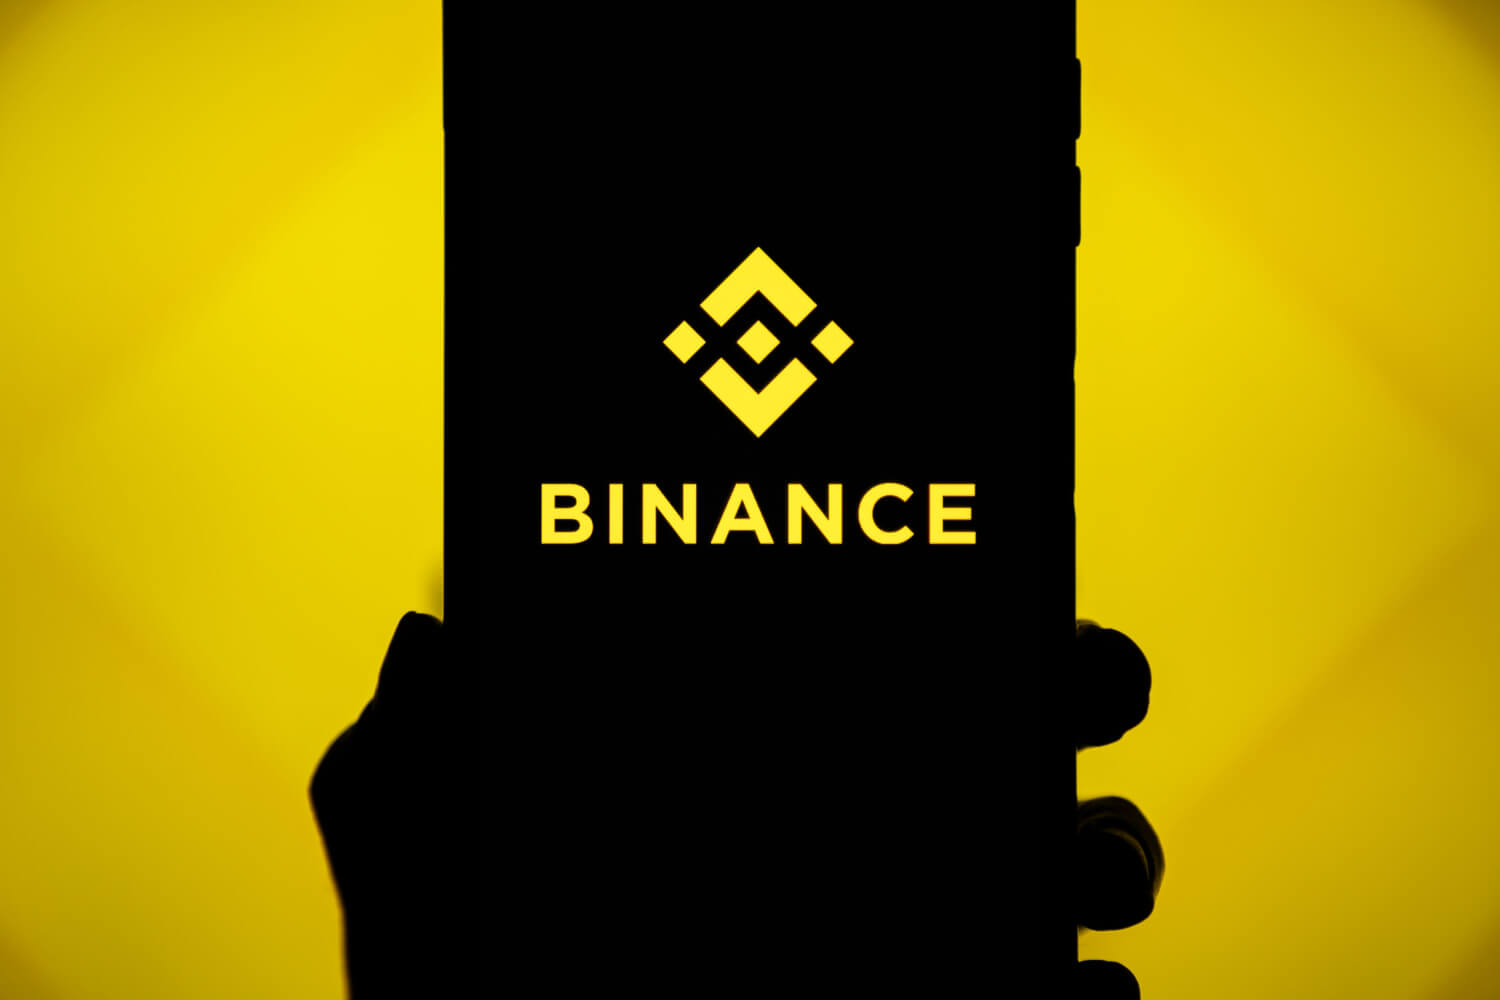 binance logo on a phone held before a yellow backdrop